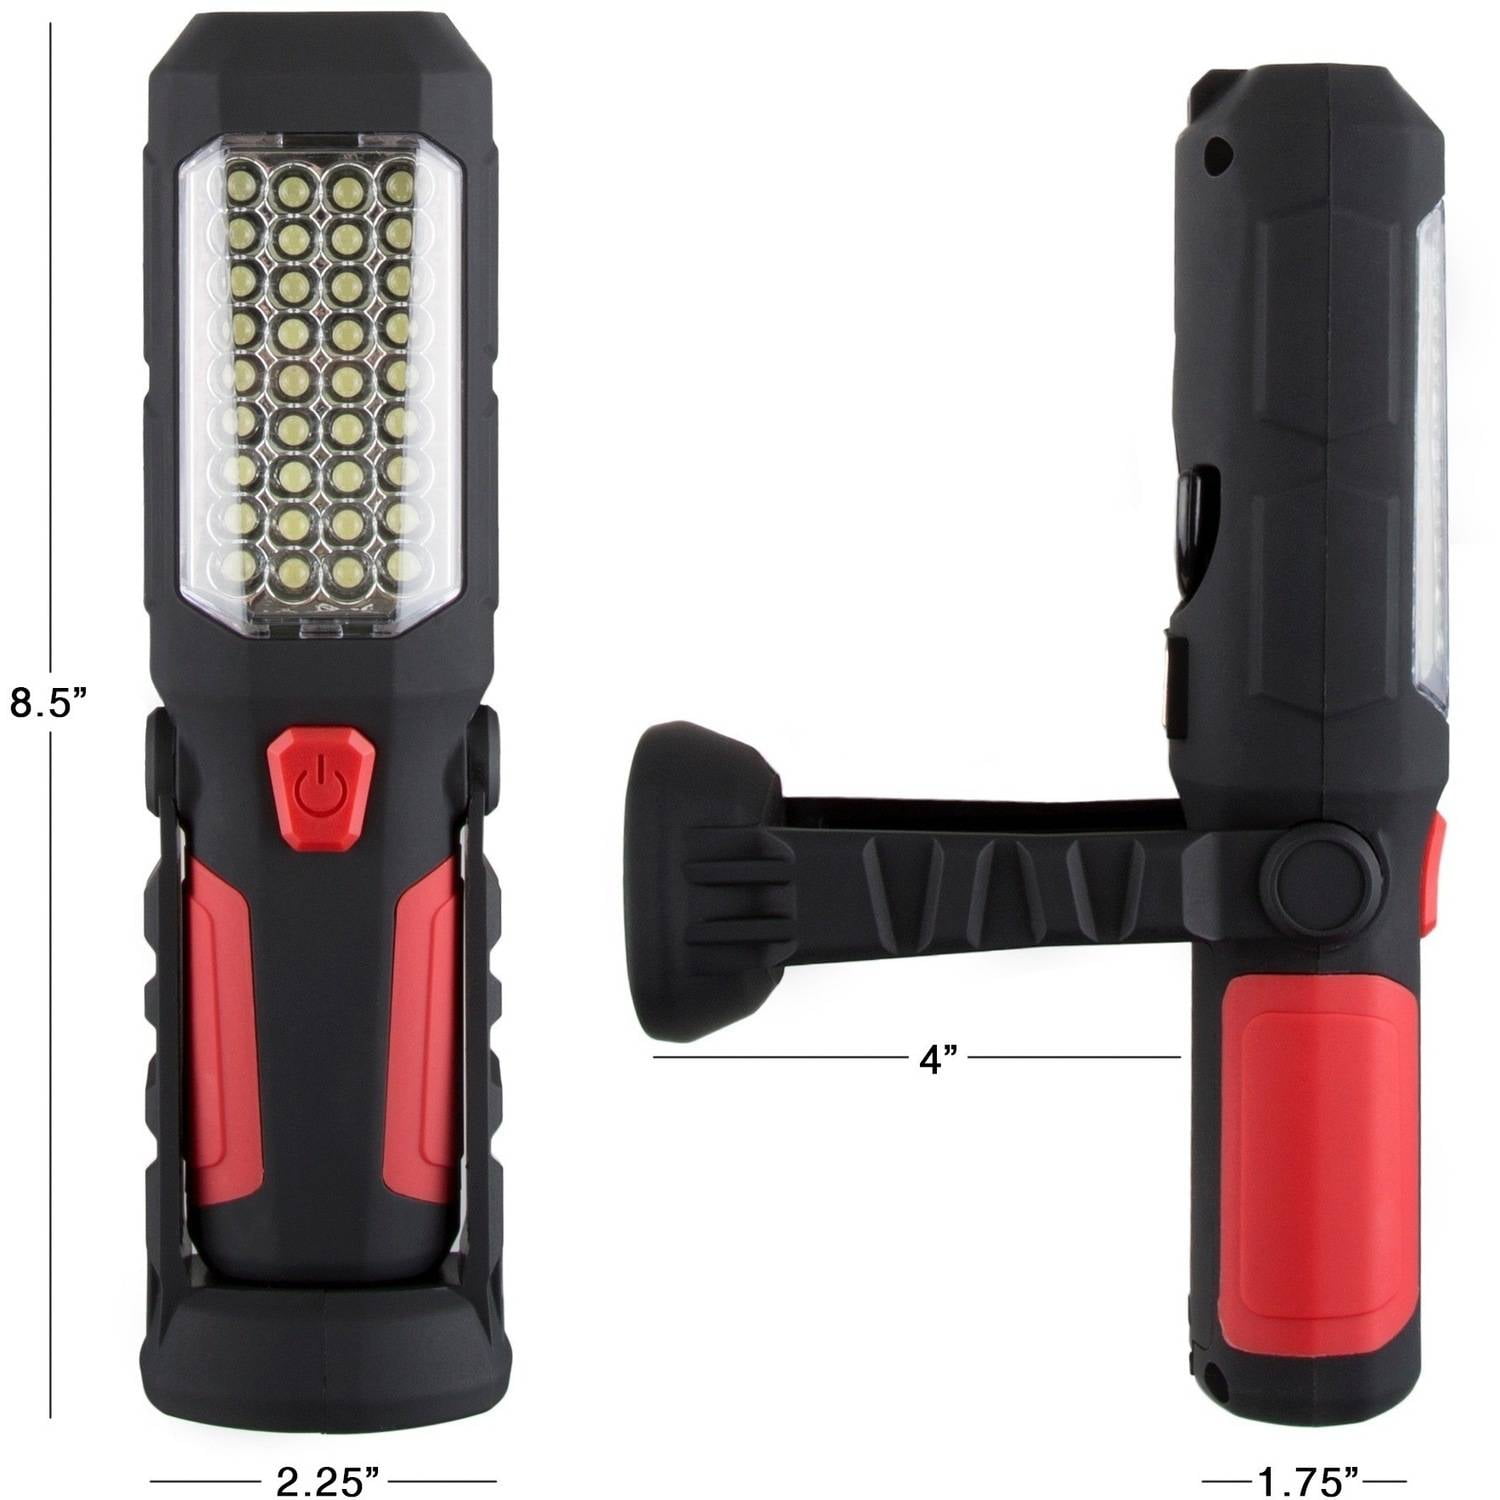 Details about   LED Flashlight Lamp Torch Lighting Handle Hanging Rotate Head For Garage Jobsite 